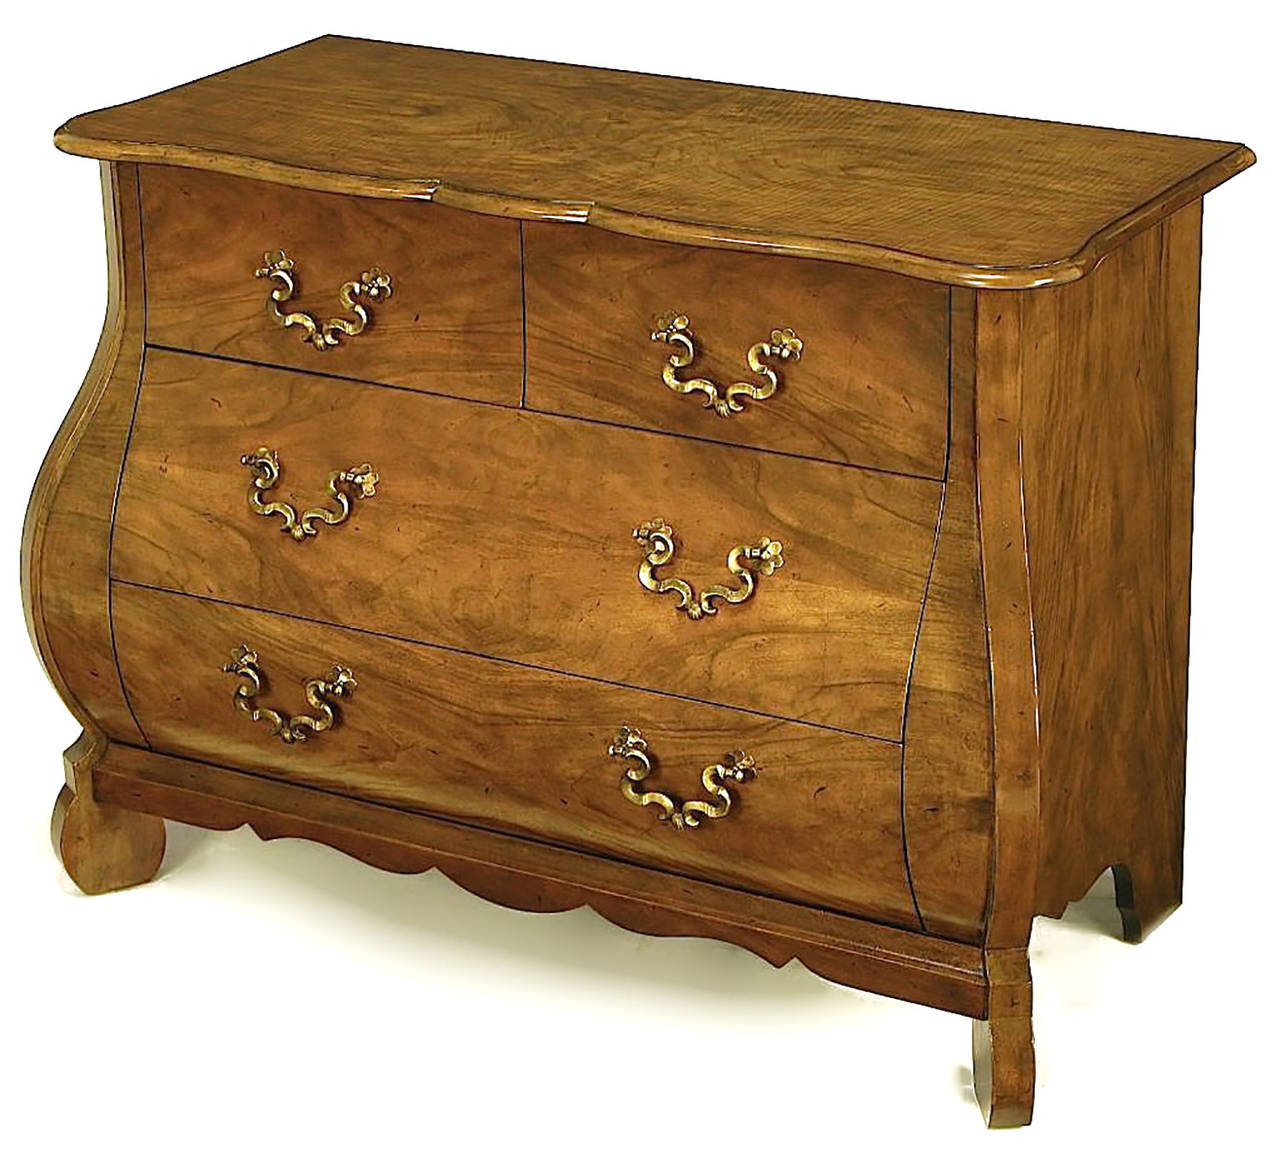 Baker Furniture collector's edition bombe-front figured walnut four-drawer commode. Linen fold solid brass drop pulls, scalloped top and apron. Canted corner front legs with scalloped side skirt and back legs.